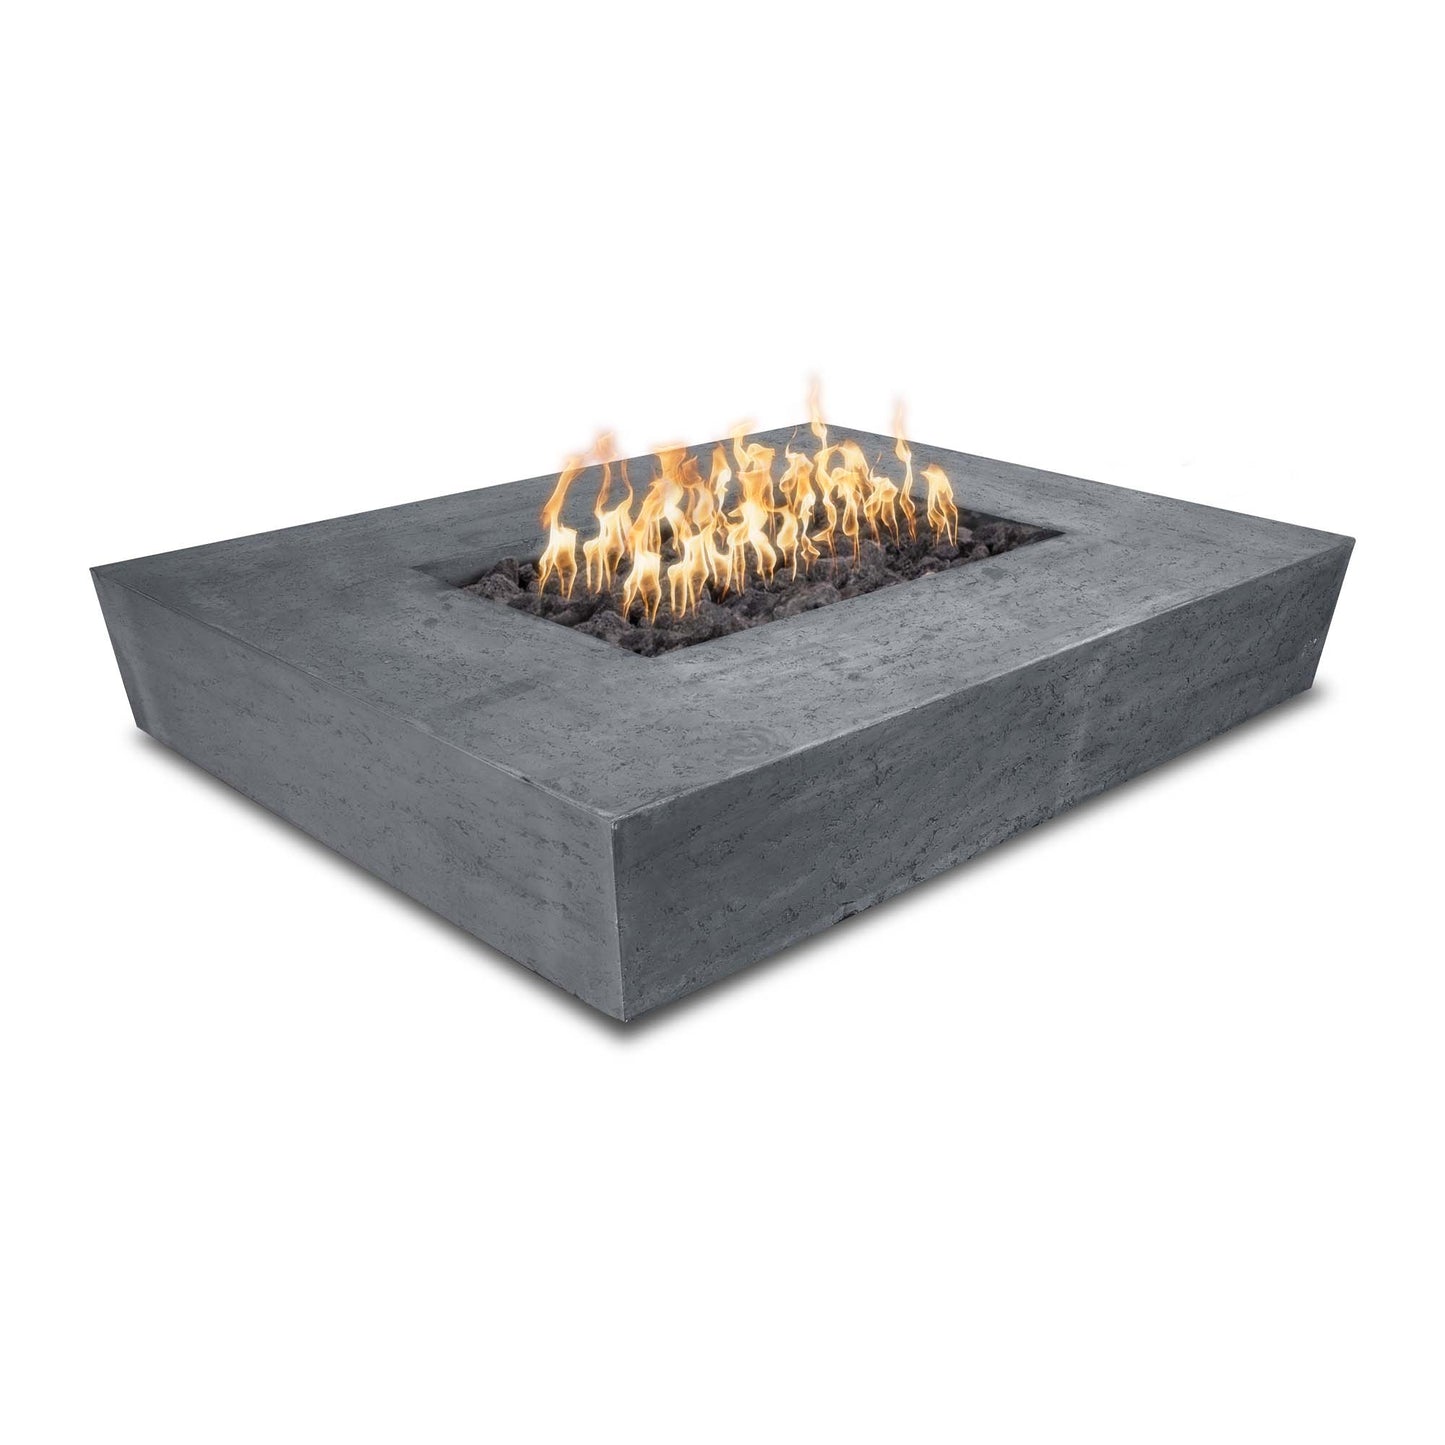 The Outdoor Plus Rectangular Heiko 58" Natural Gray GFRC Concrete Liquid Propane Fire Pit with Flame Sense with Spark Ignition